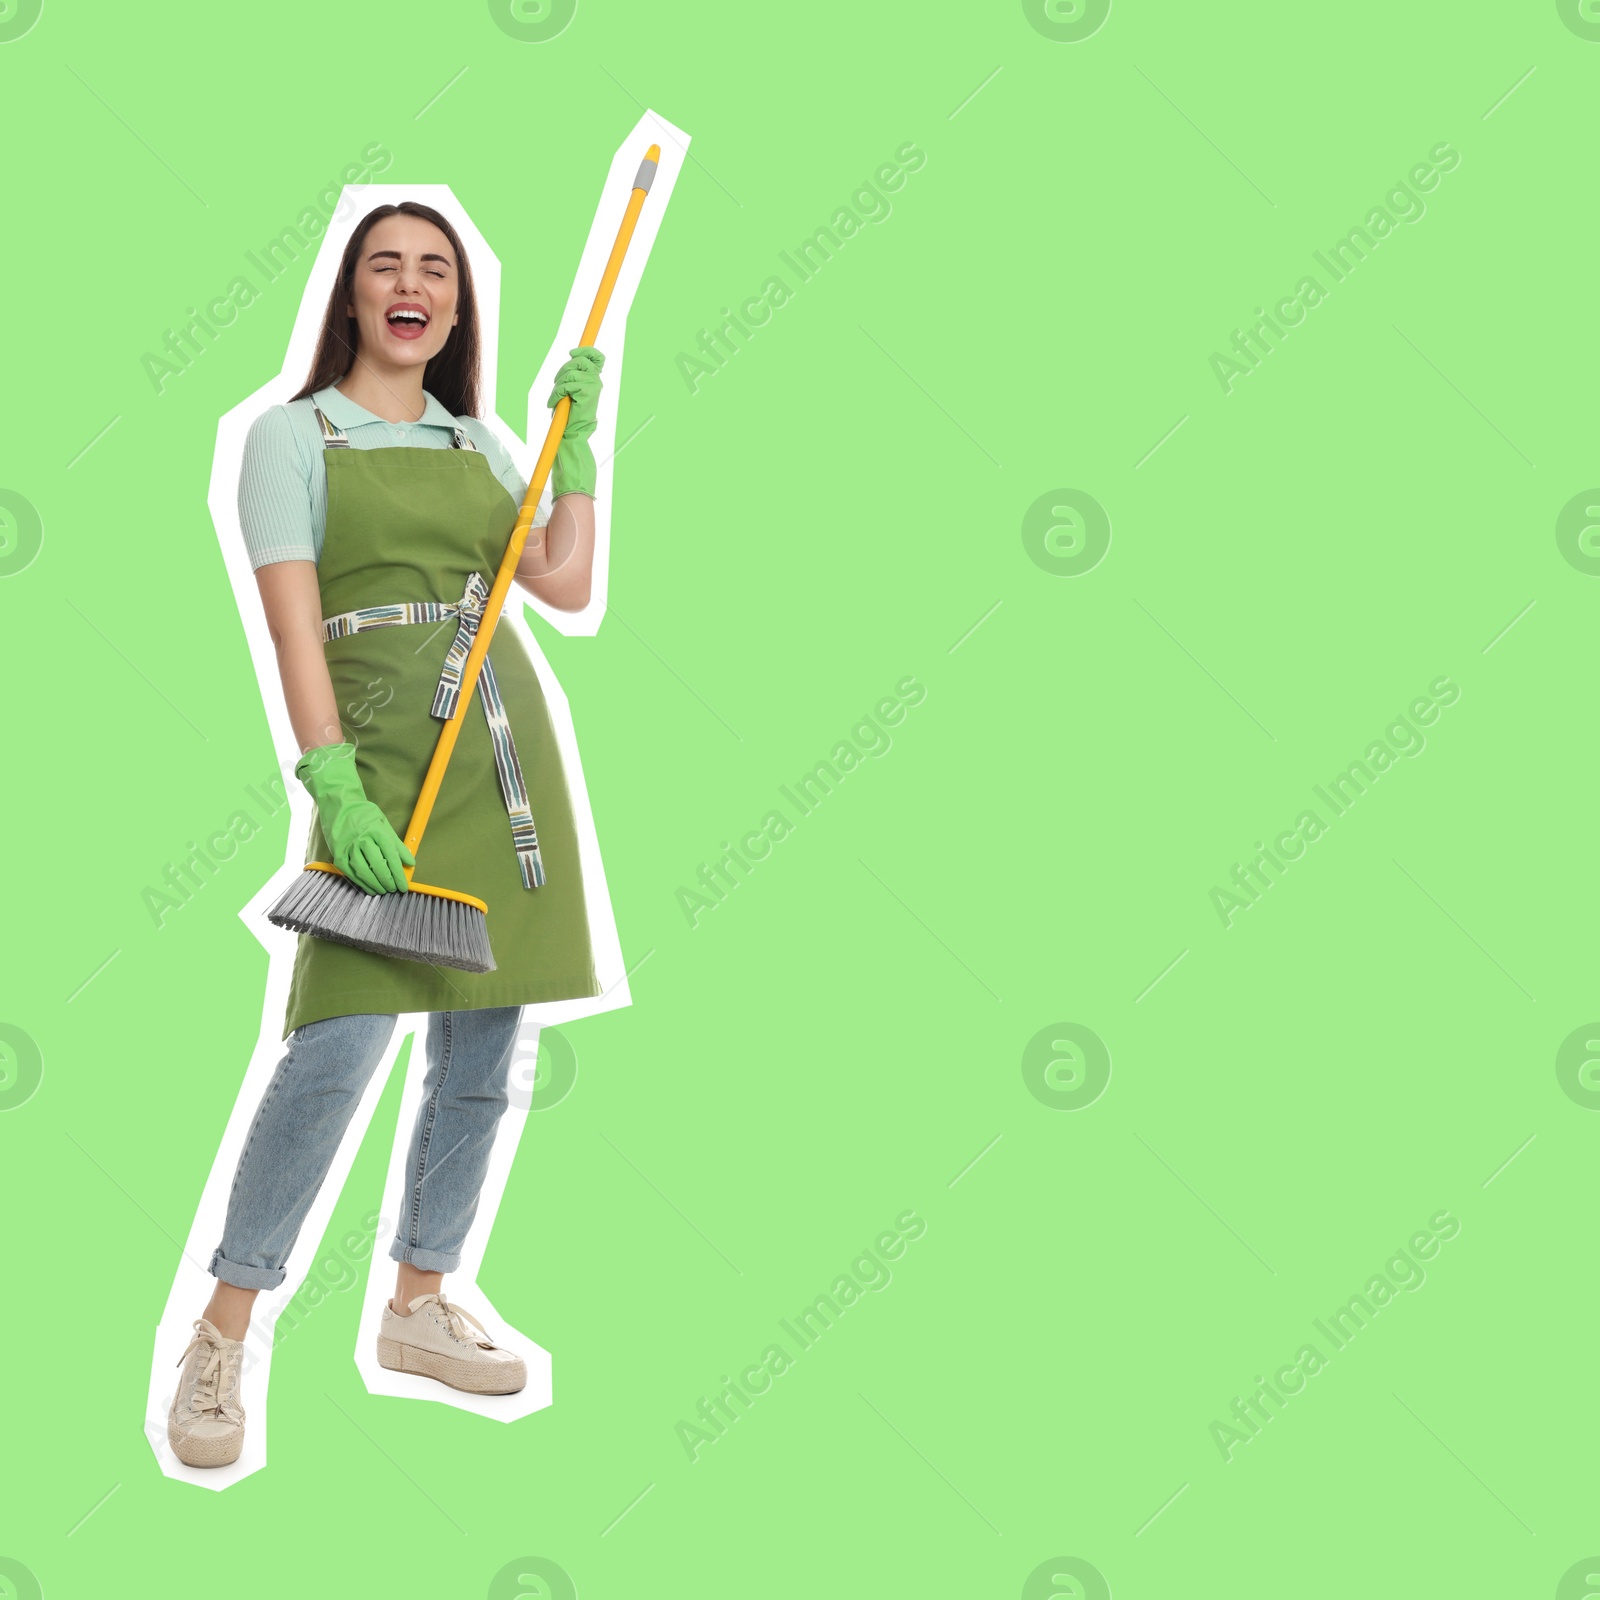 Image of Pop art poster. Beautiful young woman with broom singing on light green background. Space for text